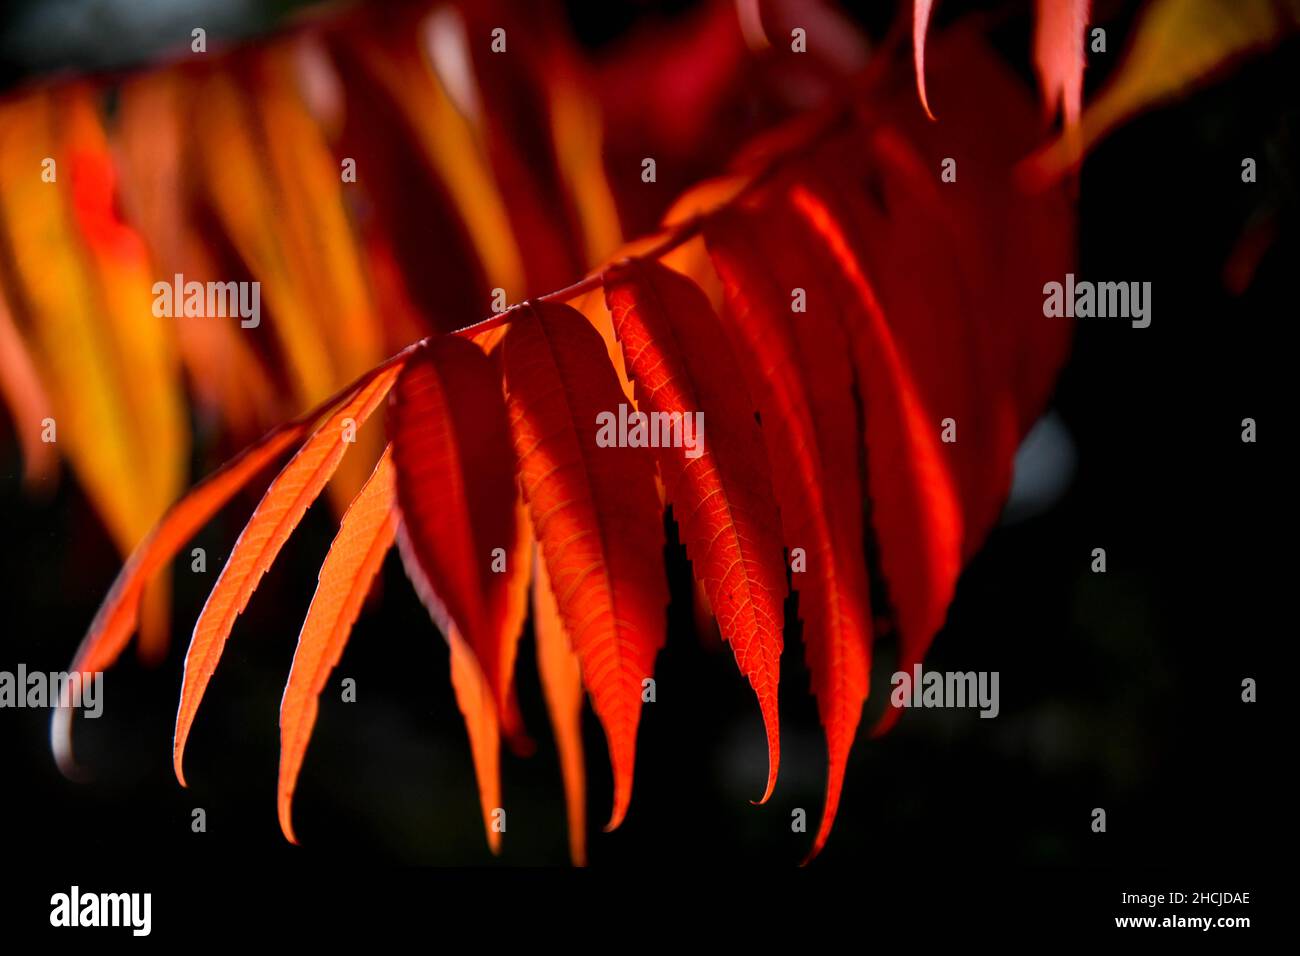 Macro shot of red sumac leaves in the fall against a dark blurry background Stock Photo